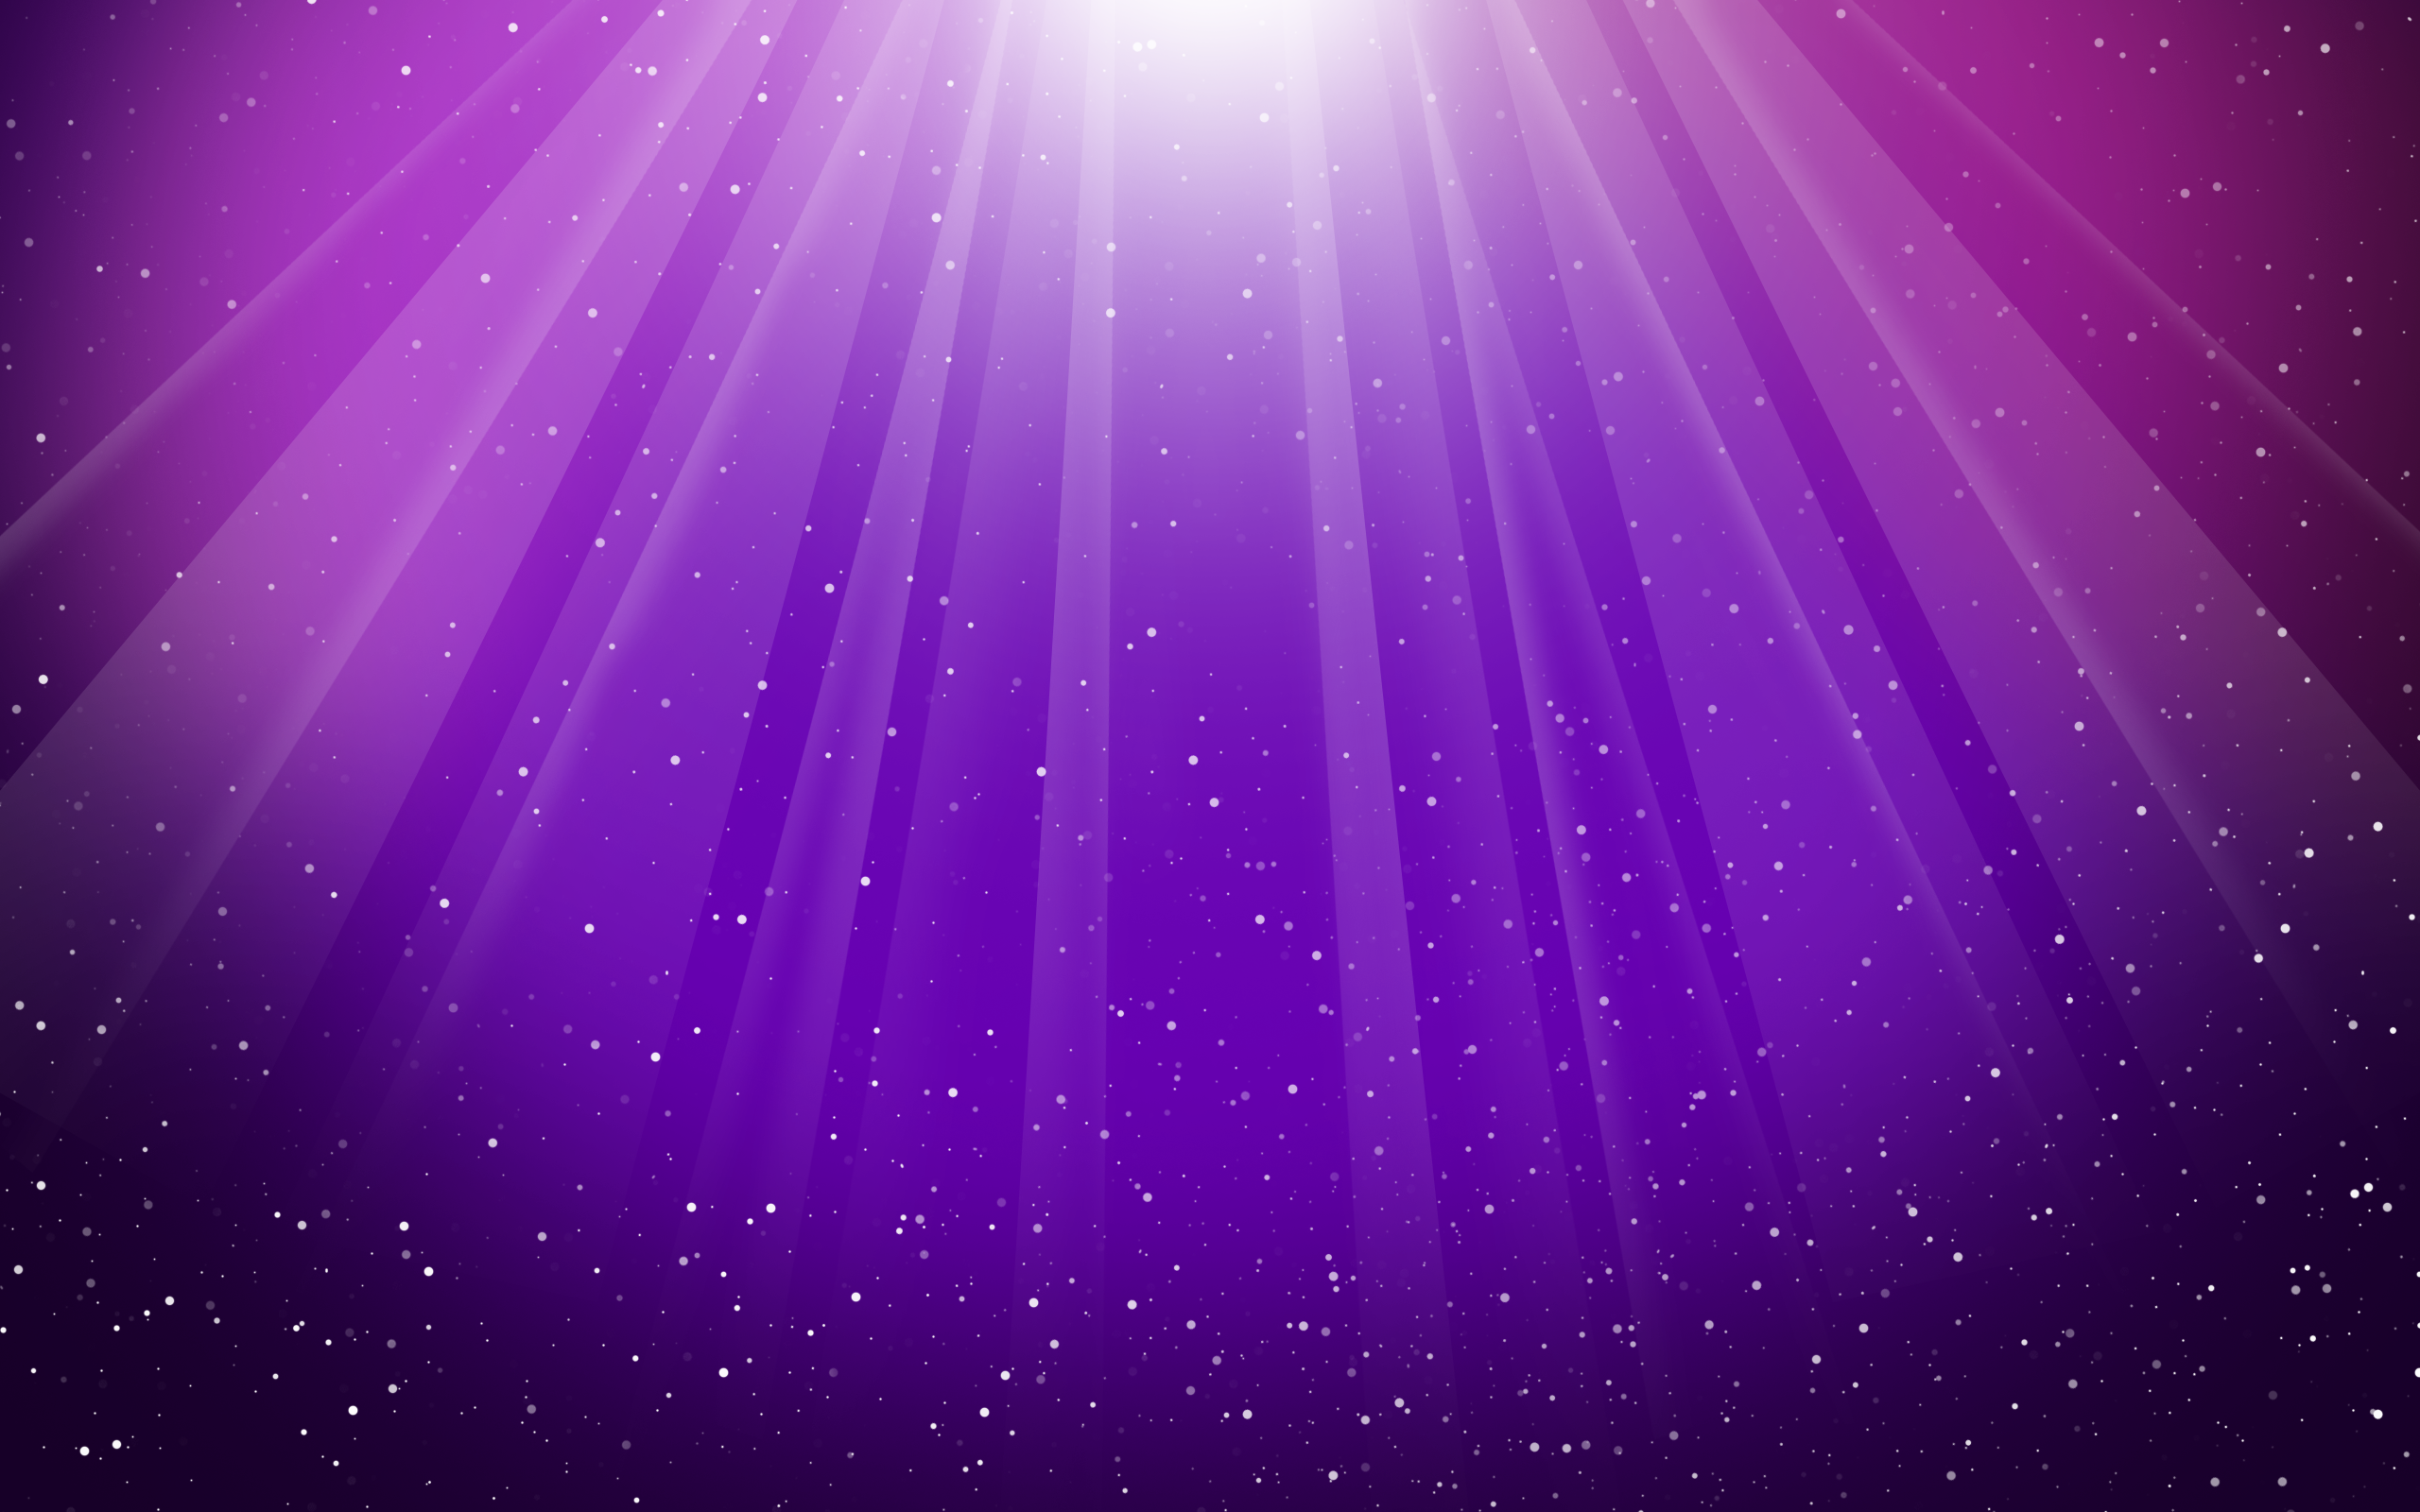  High Definition Purple Wallpaper Images for Free Download